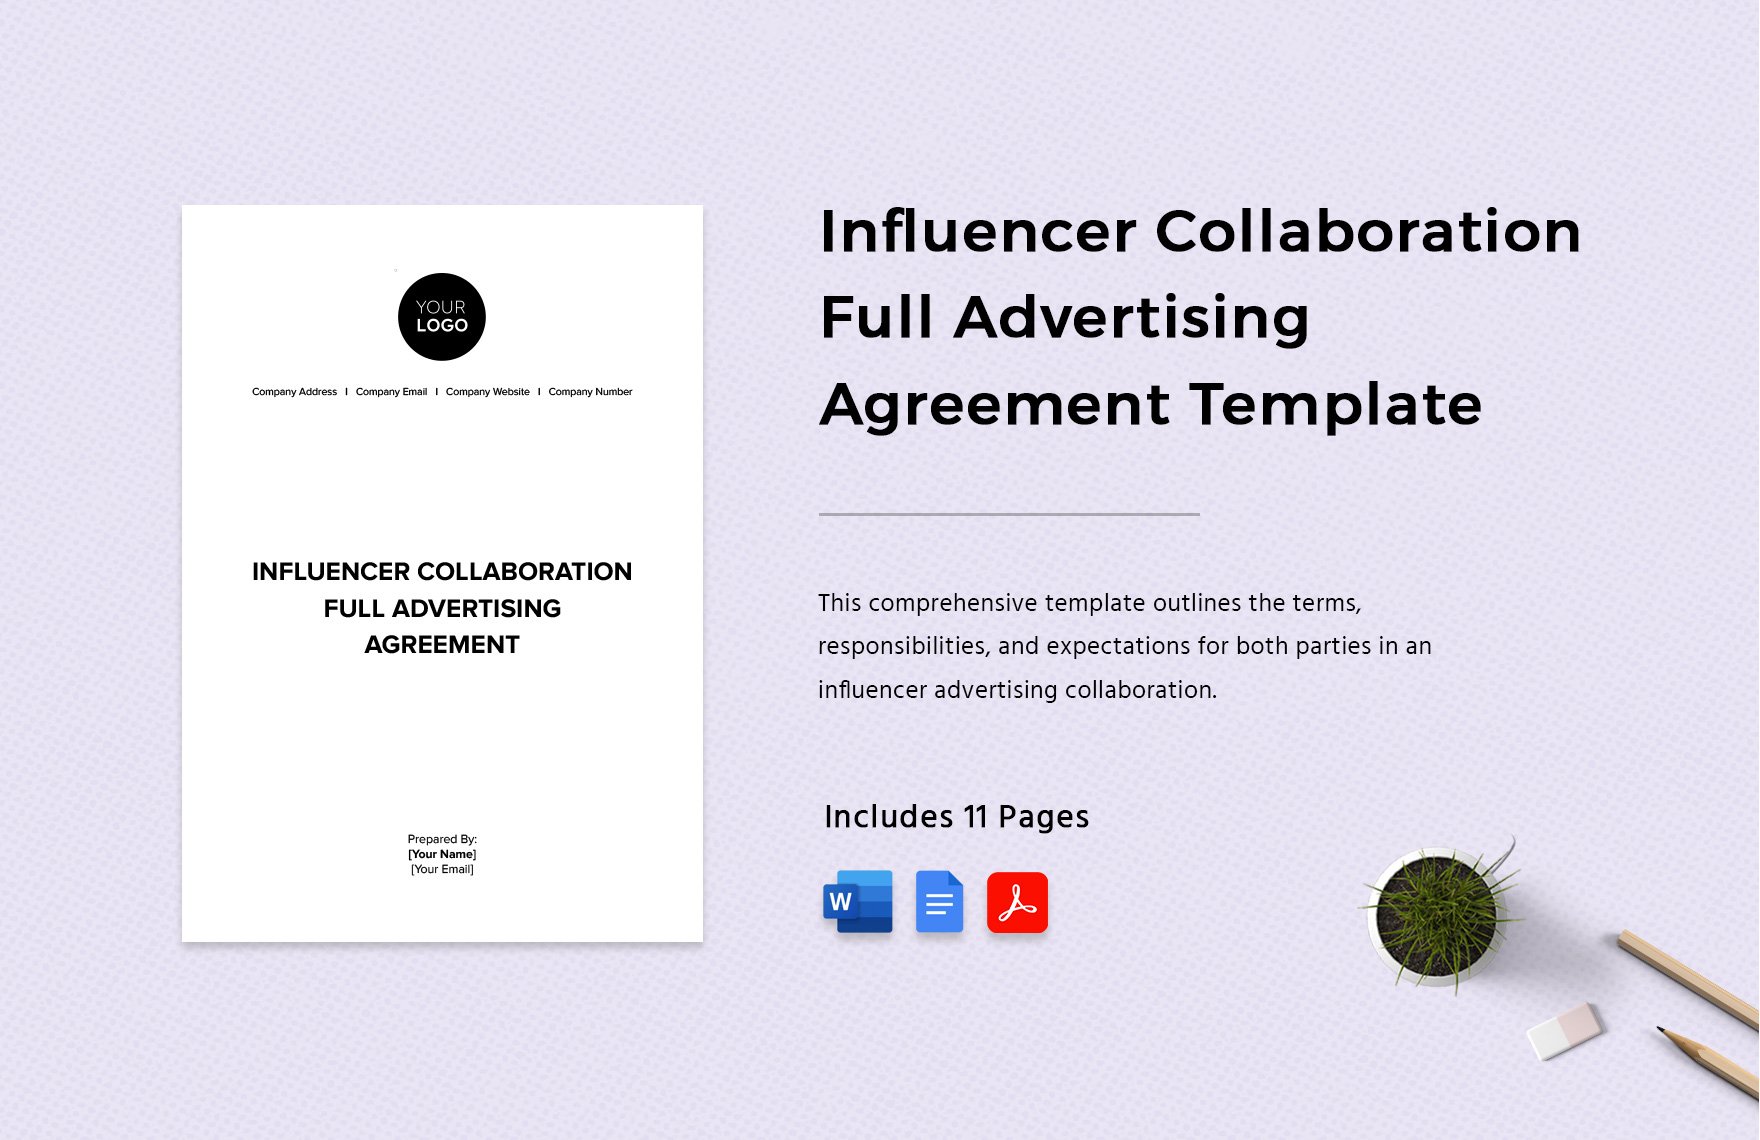 Influencer Collaboration Full Advertising Agreement Template in Word, Google Docs, PDF